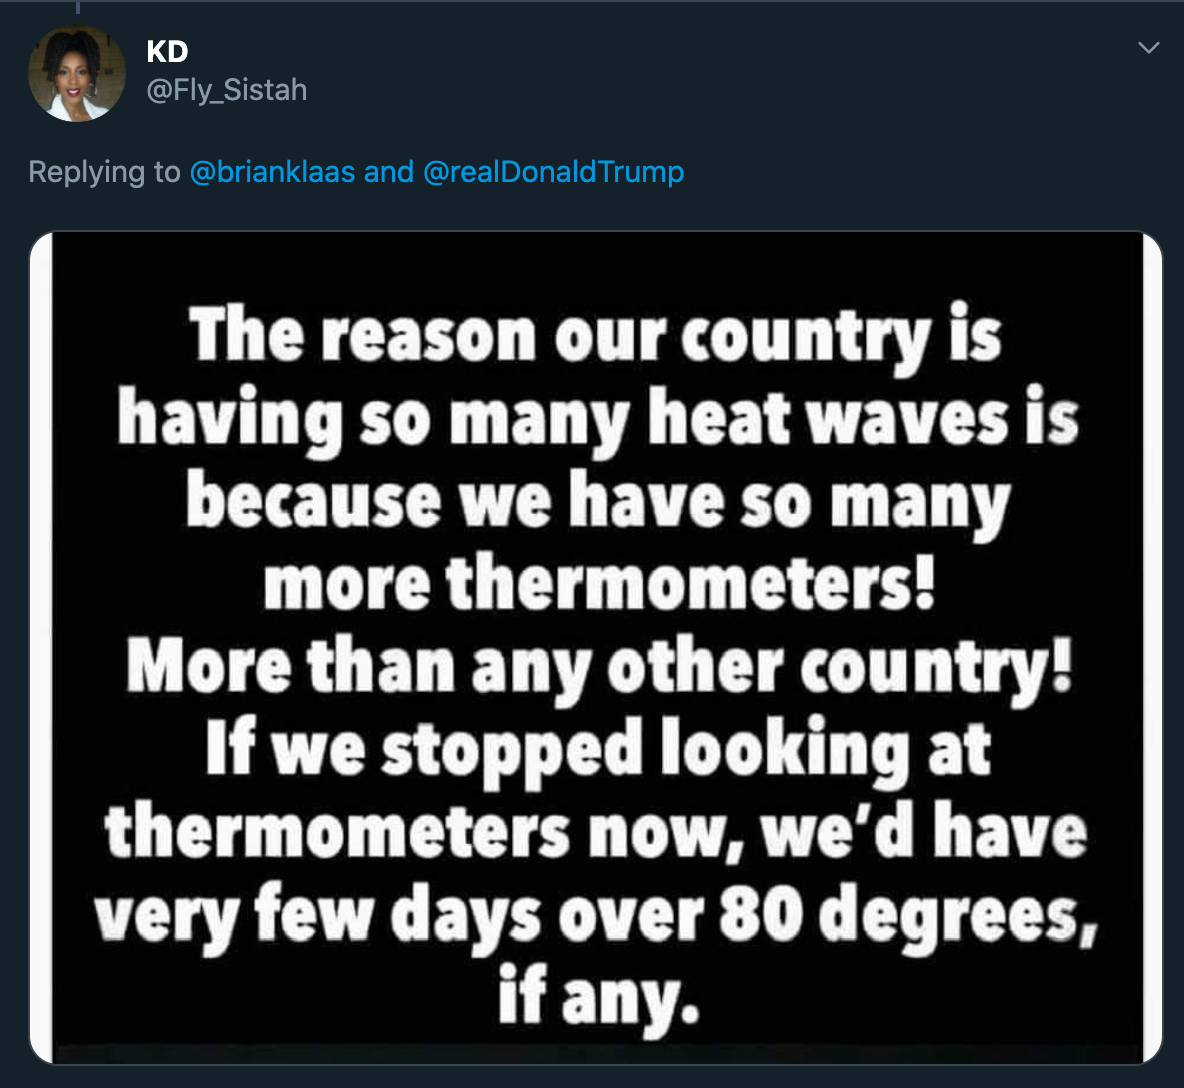 ton steine scherben - Kd and Trump The reason our country is having so many heat waves is because we have so many more thermometers! More than any other country! If we stopped looking at thermometers now, we'd have very few days over 80 degrees, if any.